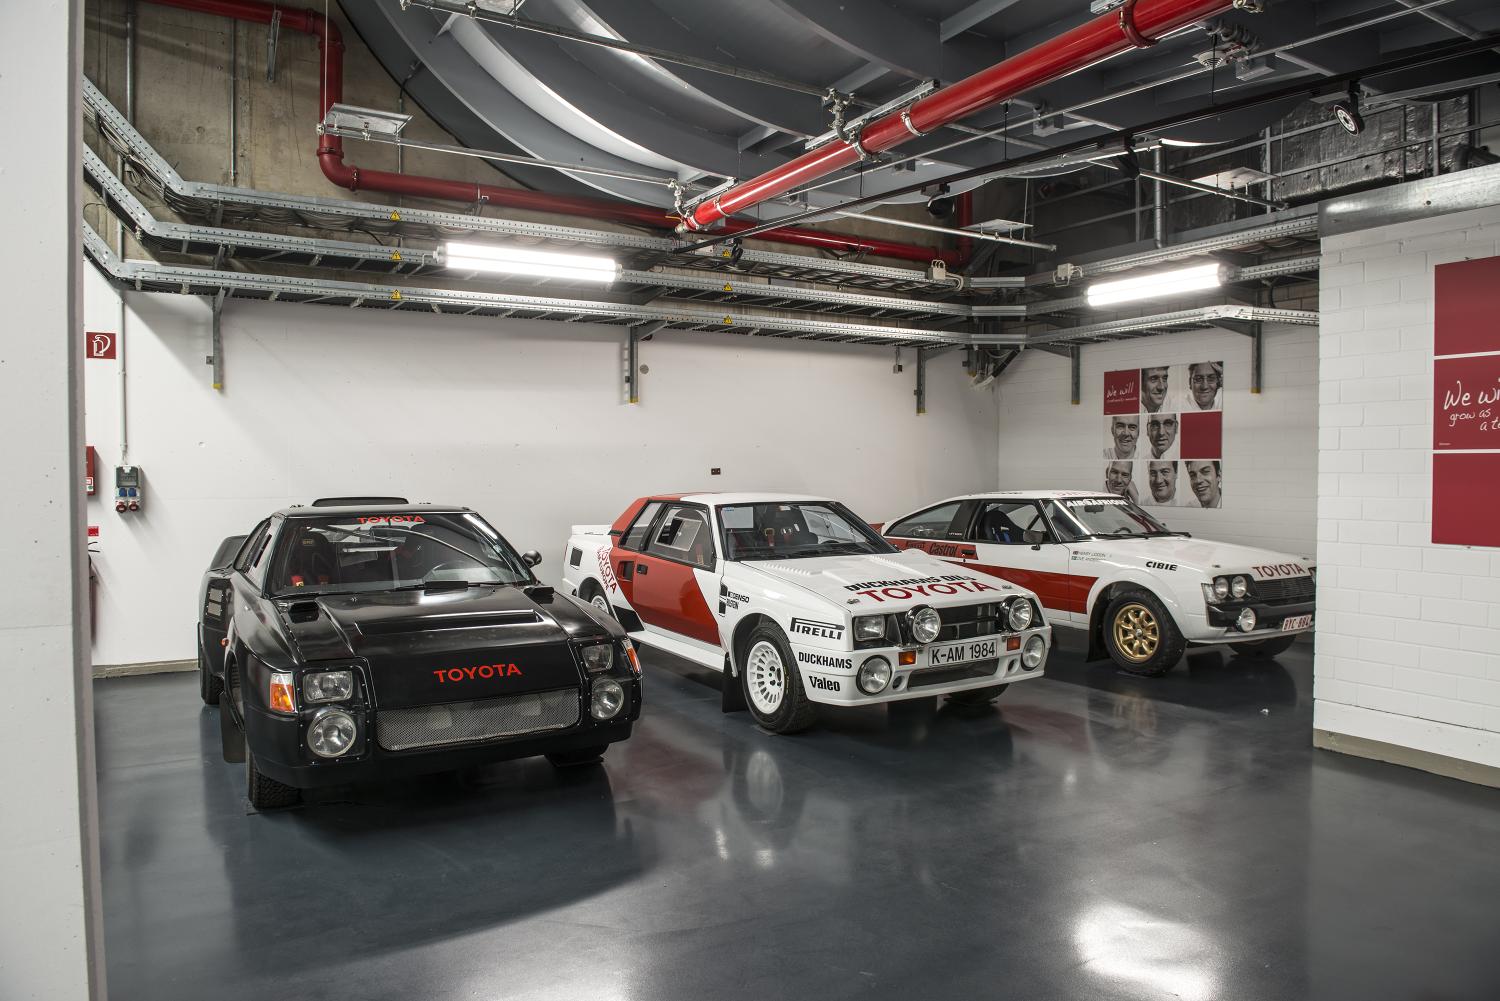 Awesome 1980s & ’90s Toyota rally car collection